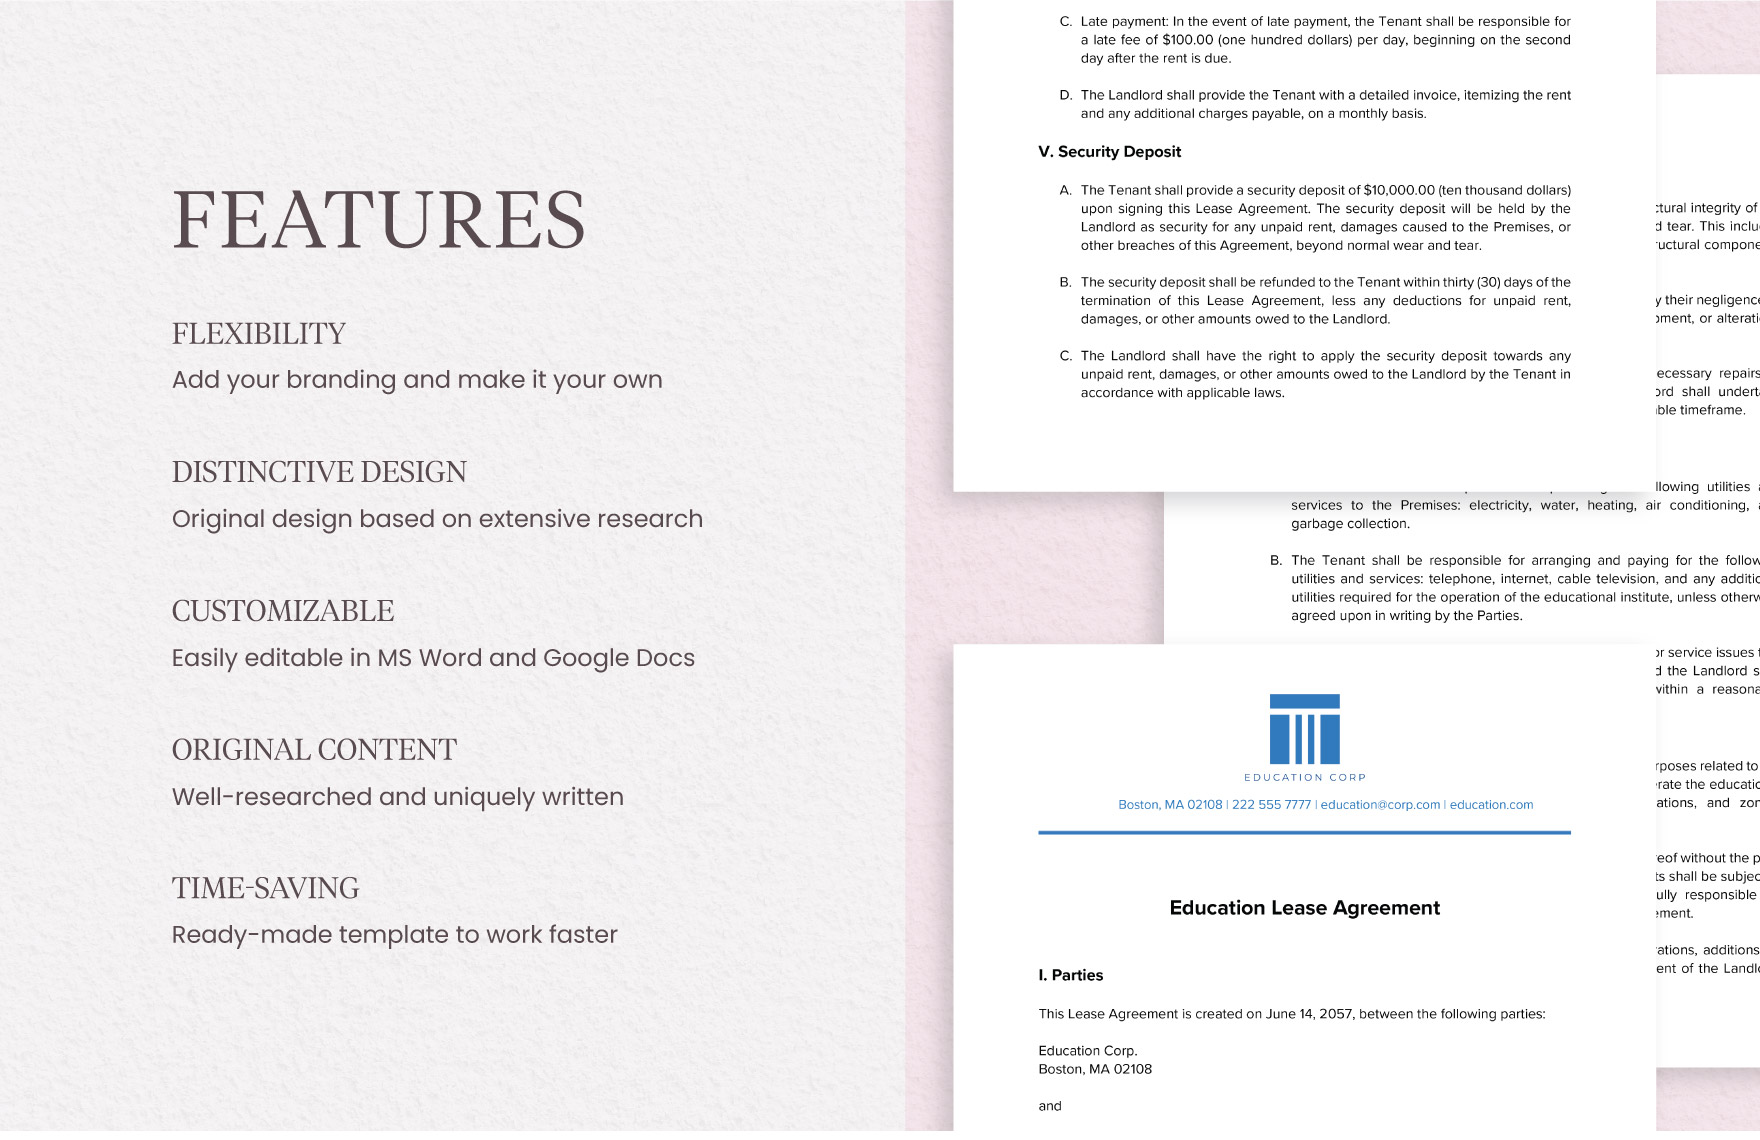 Education Lease Agreement Template